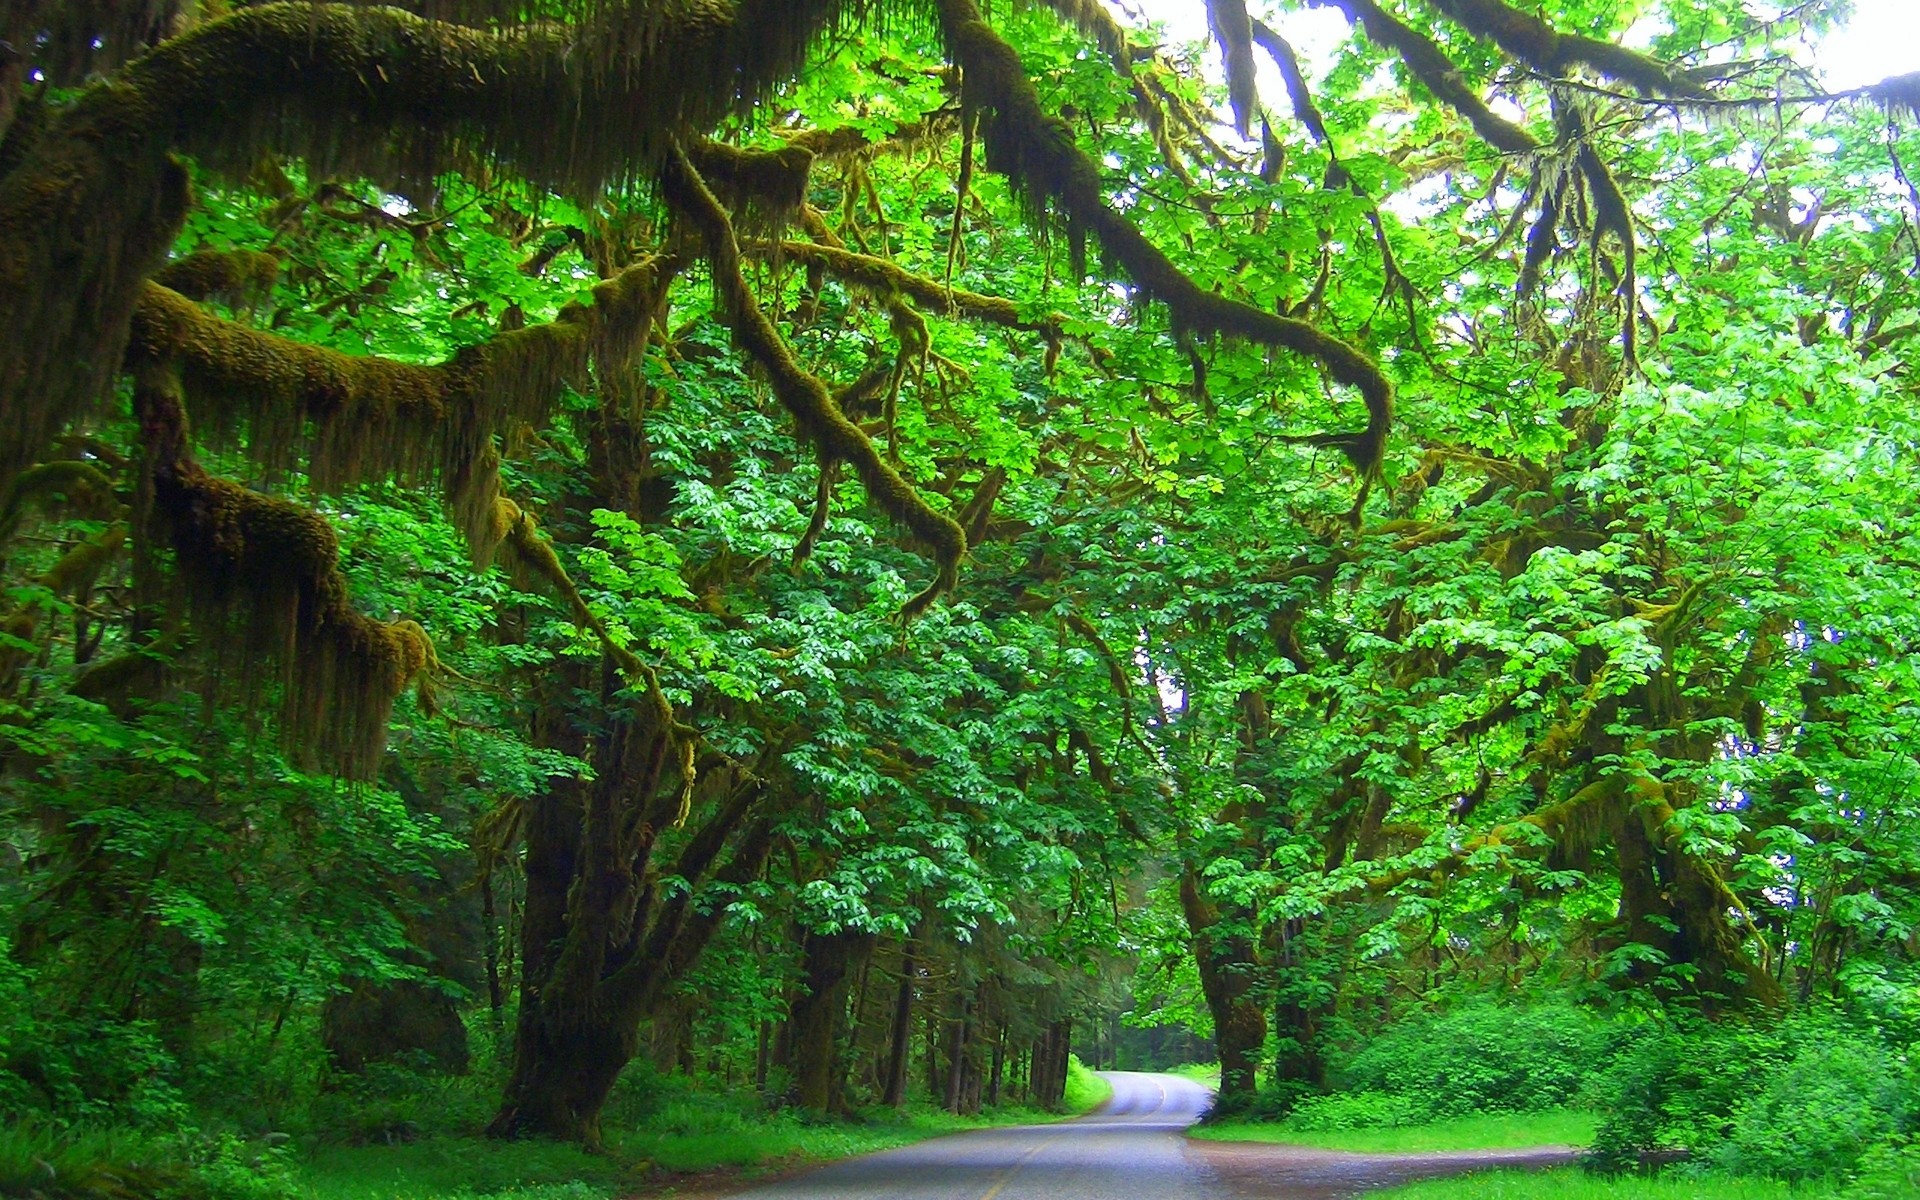 General 1920x1200 nature Washington State Olympic National Park trees road grass green shrubs bright branch plants outdoors